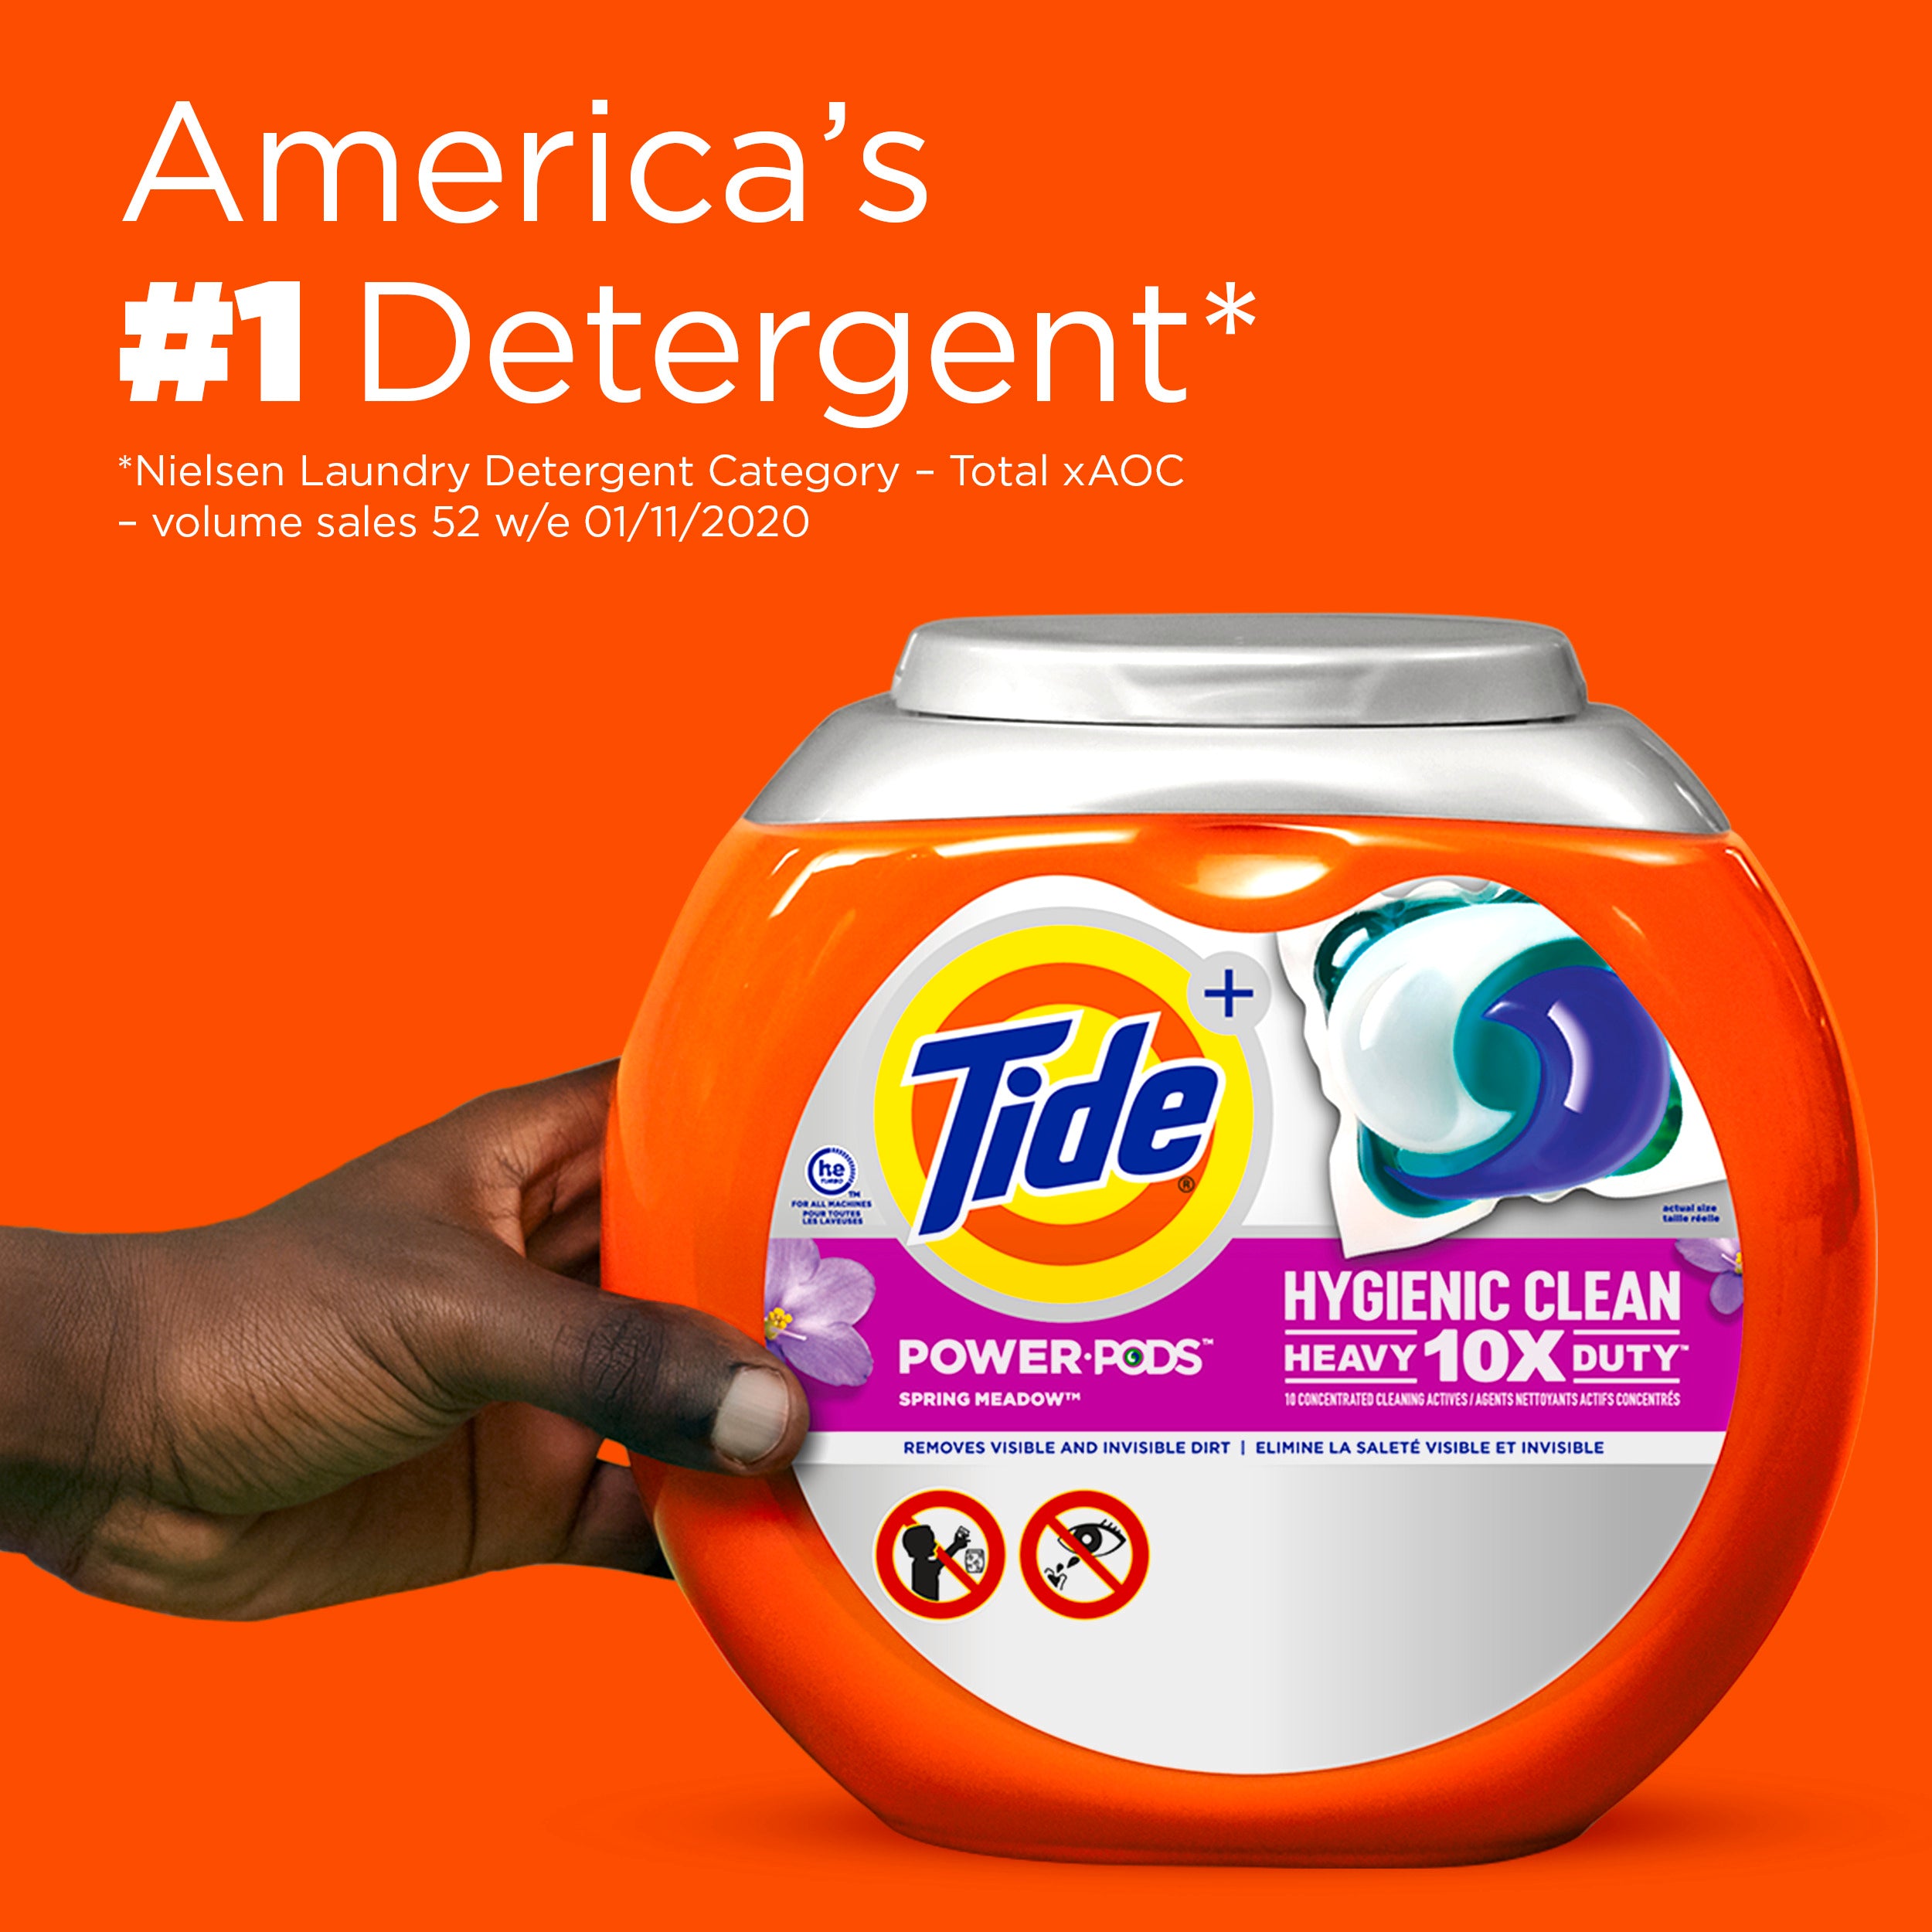 Tide Hygienic Clean Power Pods Spring Meadow, 48 Ct Laundry Detergent Pacs